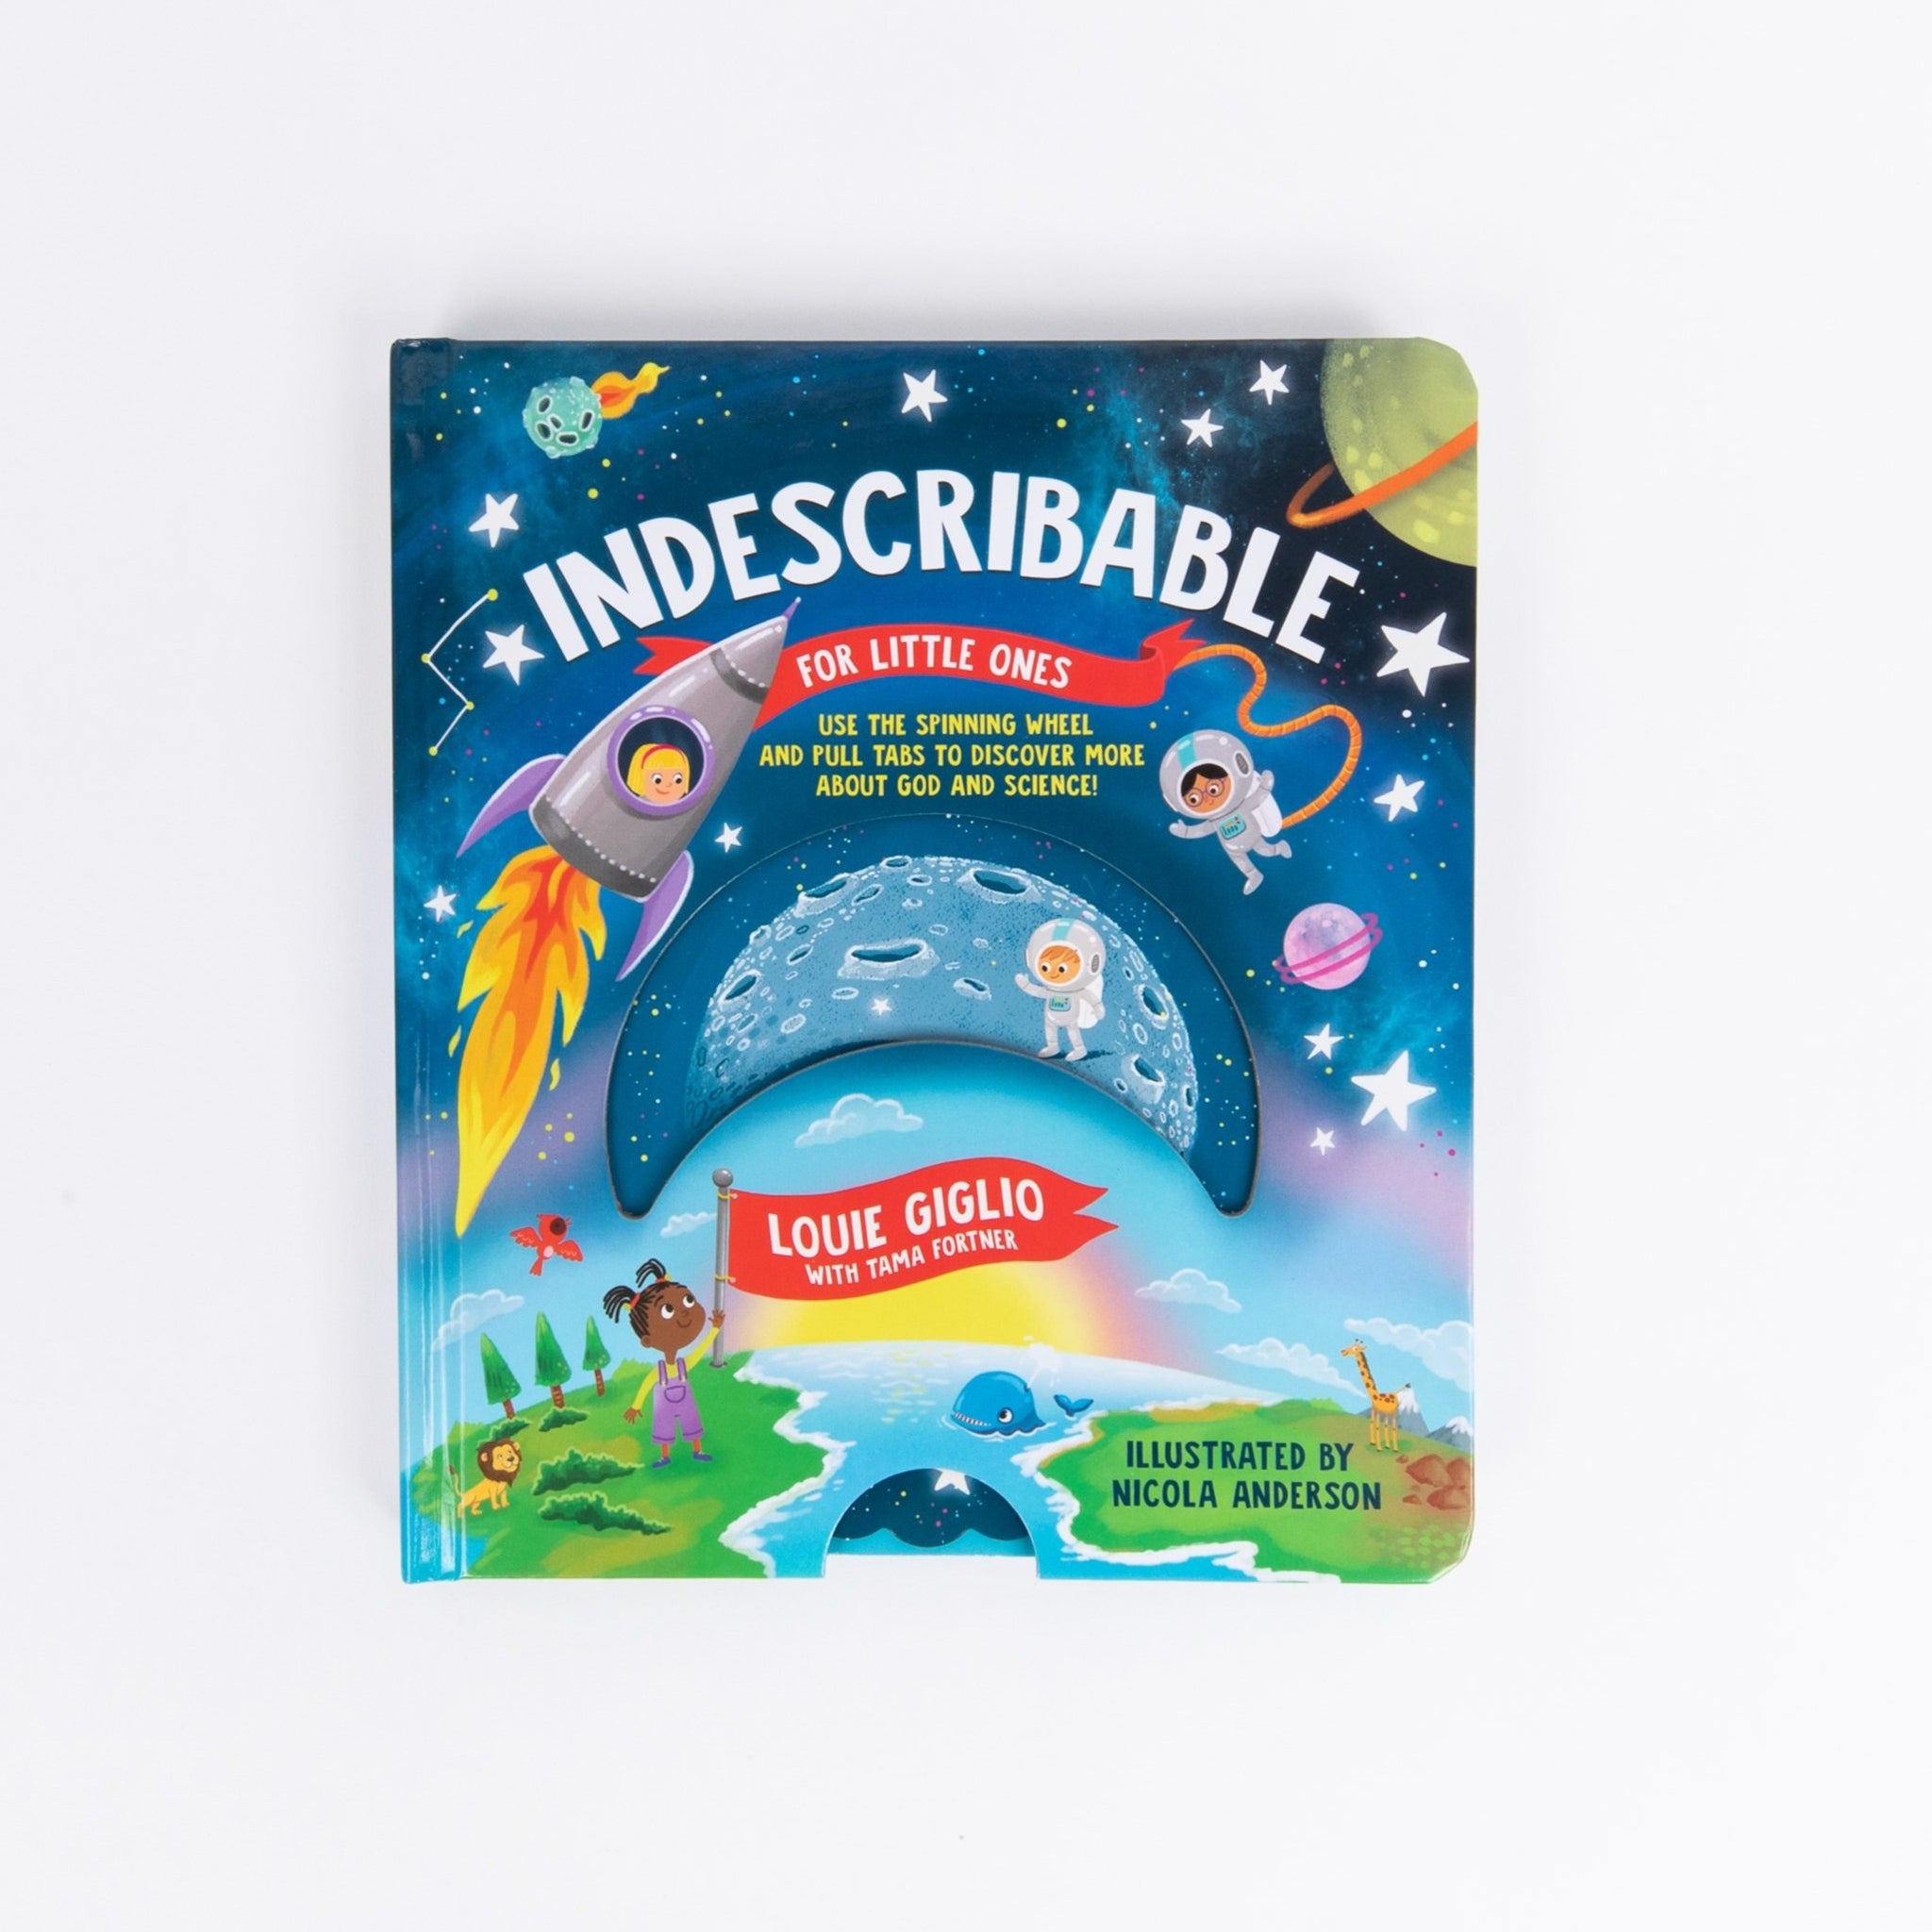 Indescribable Kids Devotional Series By Louie Giglio Book Review